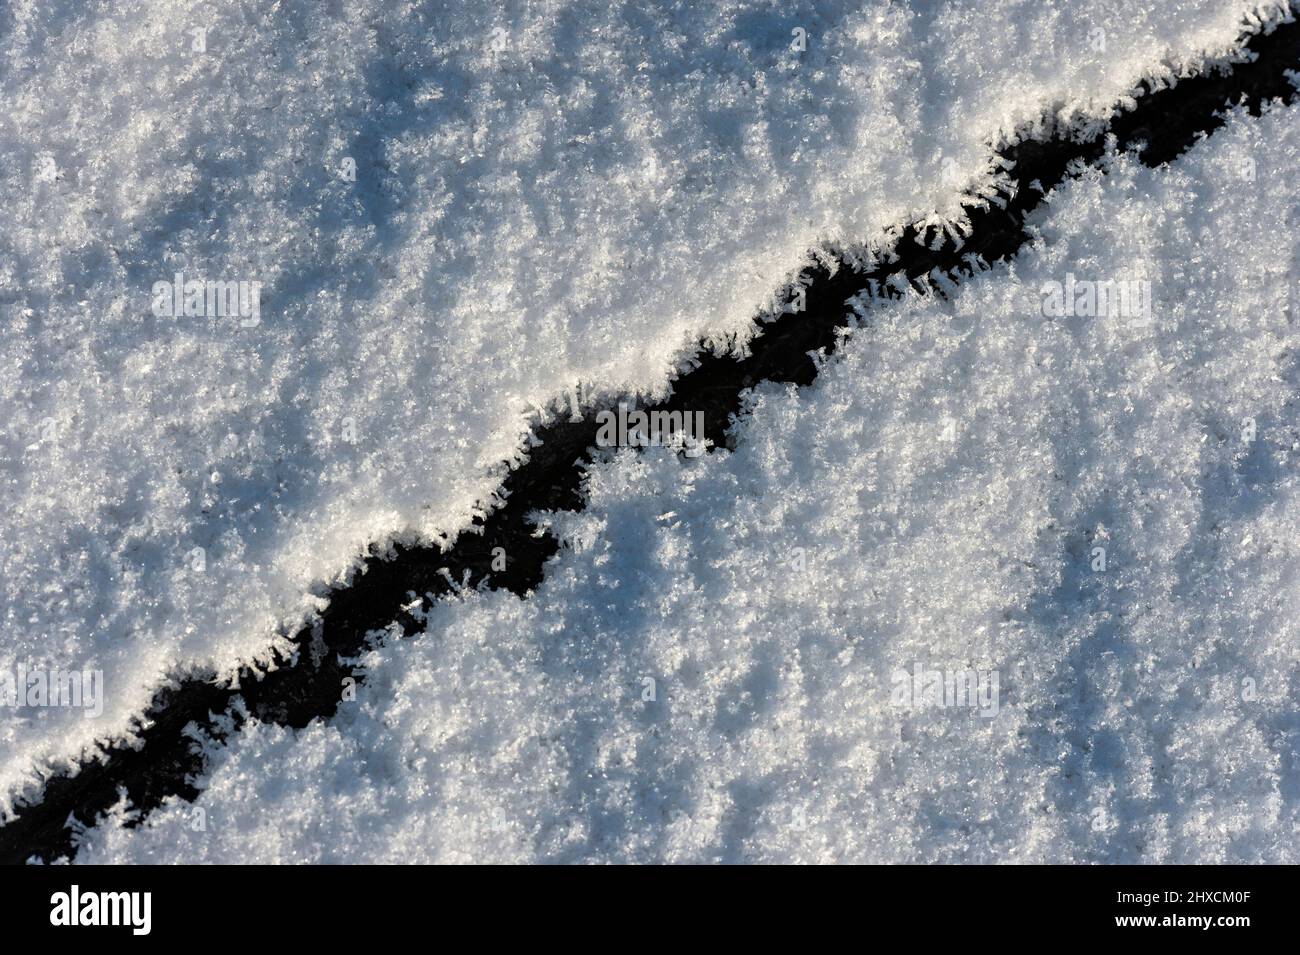 Snow with ice crevice on lake in sunlight, Halland, Sweden Stock Photo